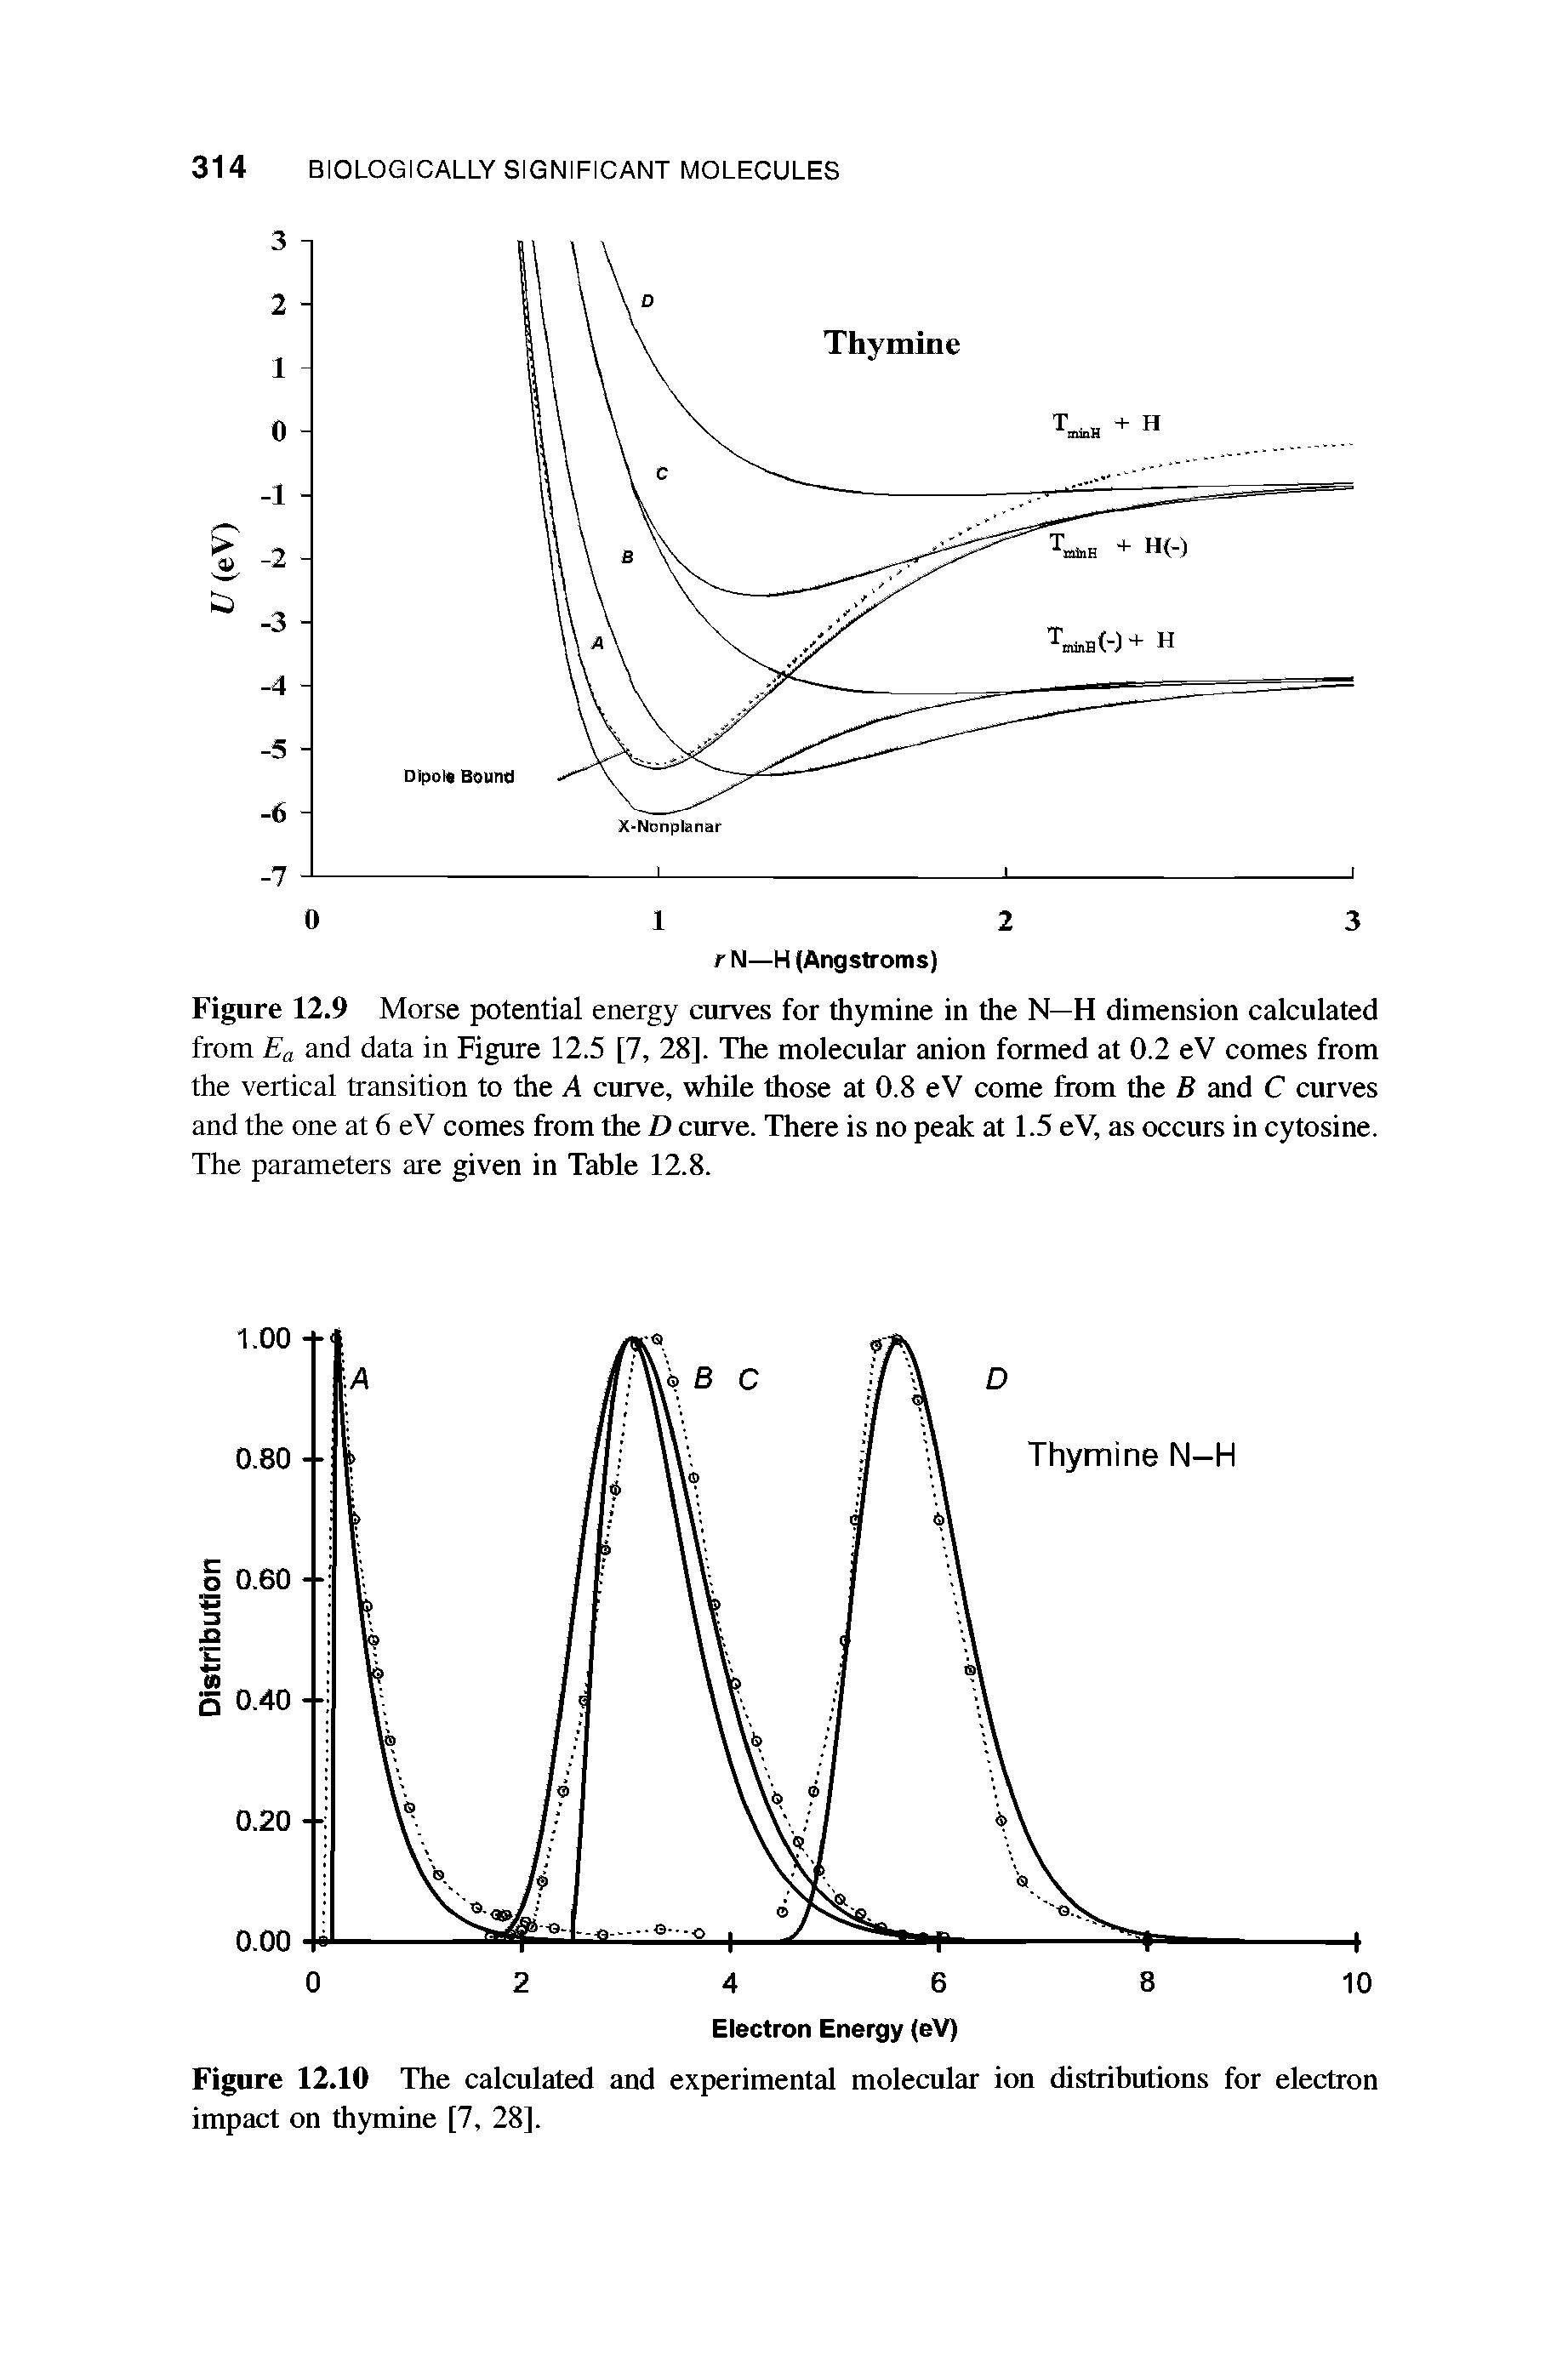 Figure 12.9 Morse potential energy curves for thymine in the N—H dimension calculated from E and data in Figure 12.5 [7, 28]. The molecular anion formed at 0.2 eV comes from the vertical transition to the A curve, while those at 0.8 eV come from the B and C curves and the one at 6 eV comes from the D curve. There is no peak at 1.5 eV, as occurs in cytosine. The parameters are given in Table 12.8.